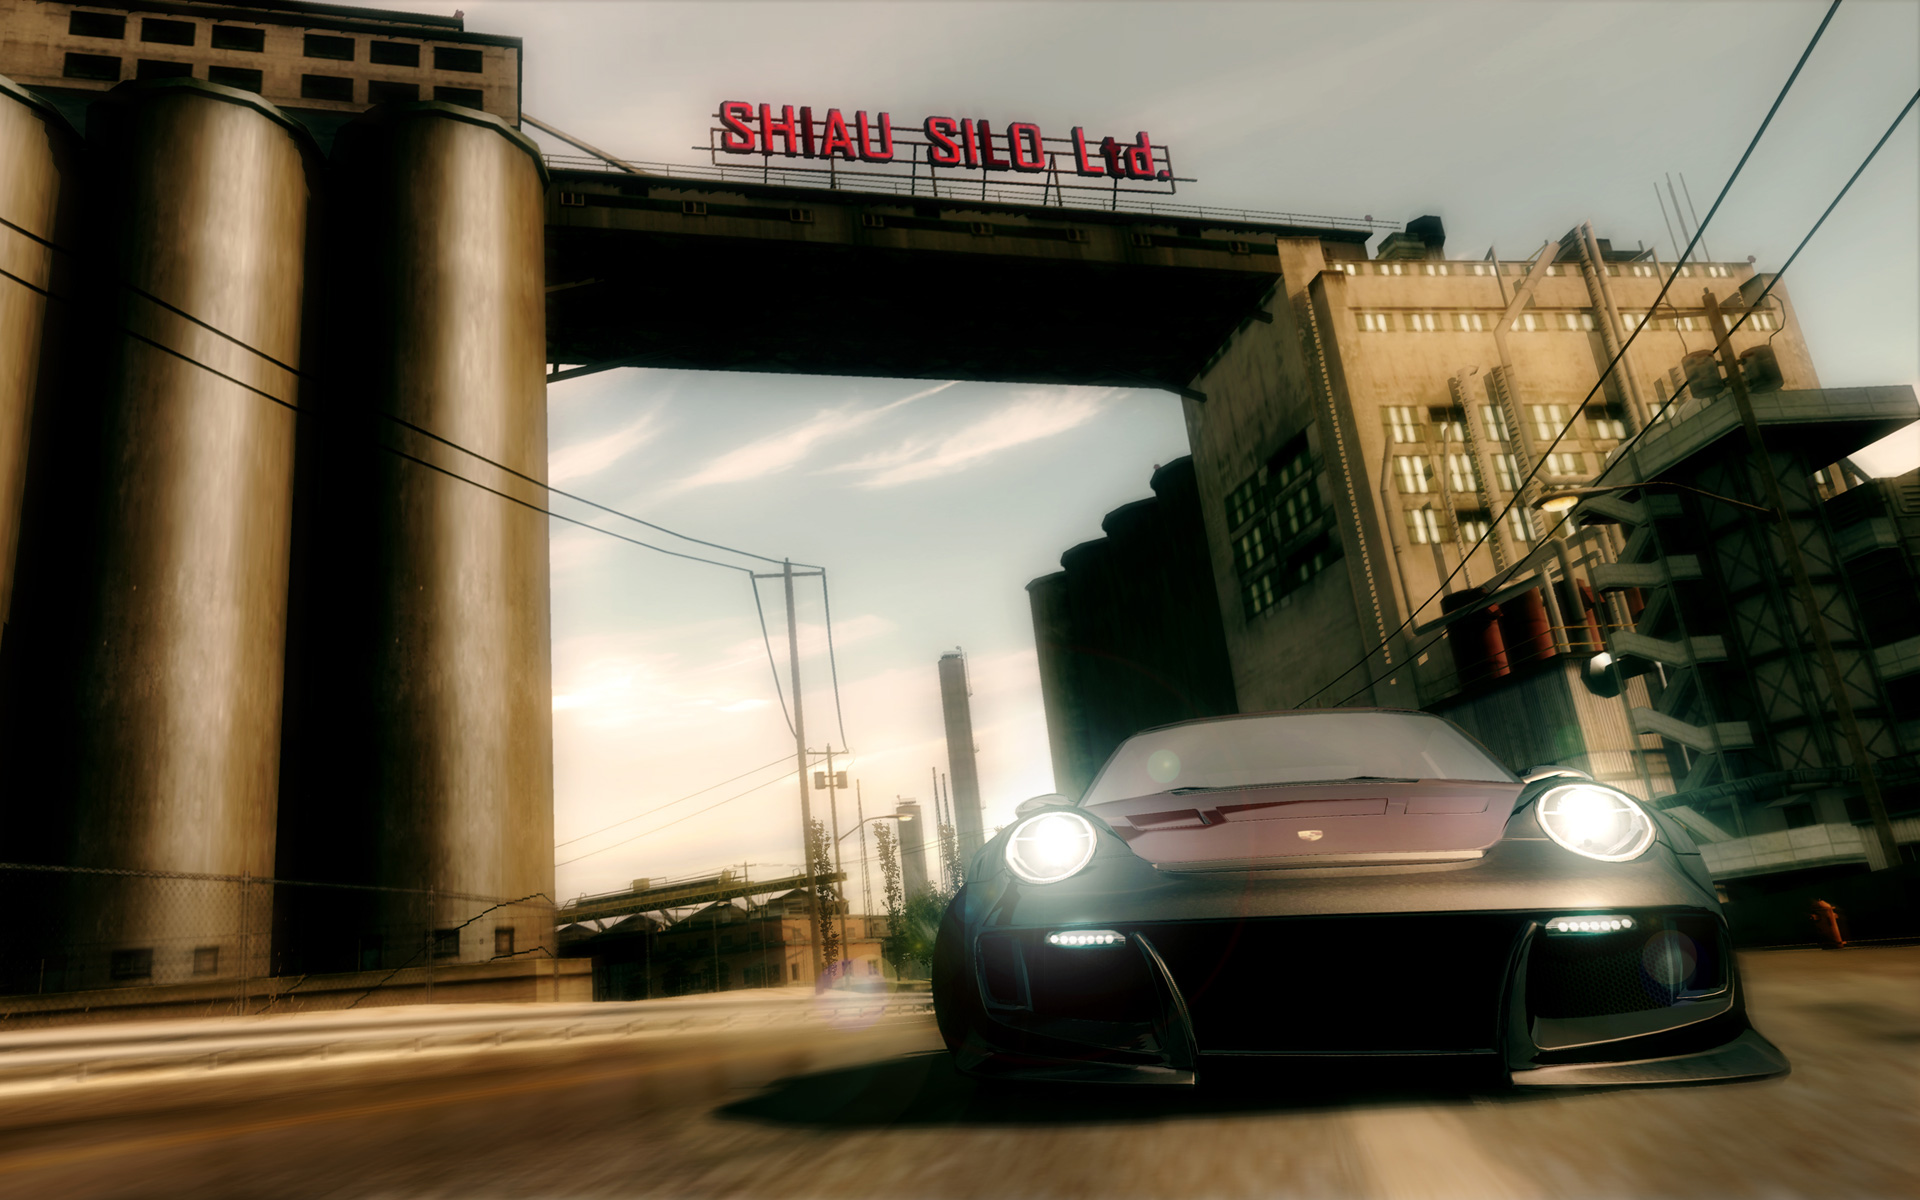 Новый NFS - Need For Speed Undercover (3 HQ фото)